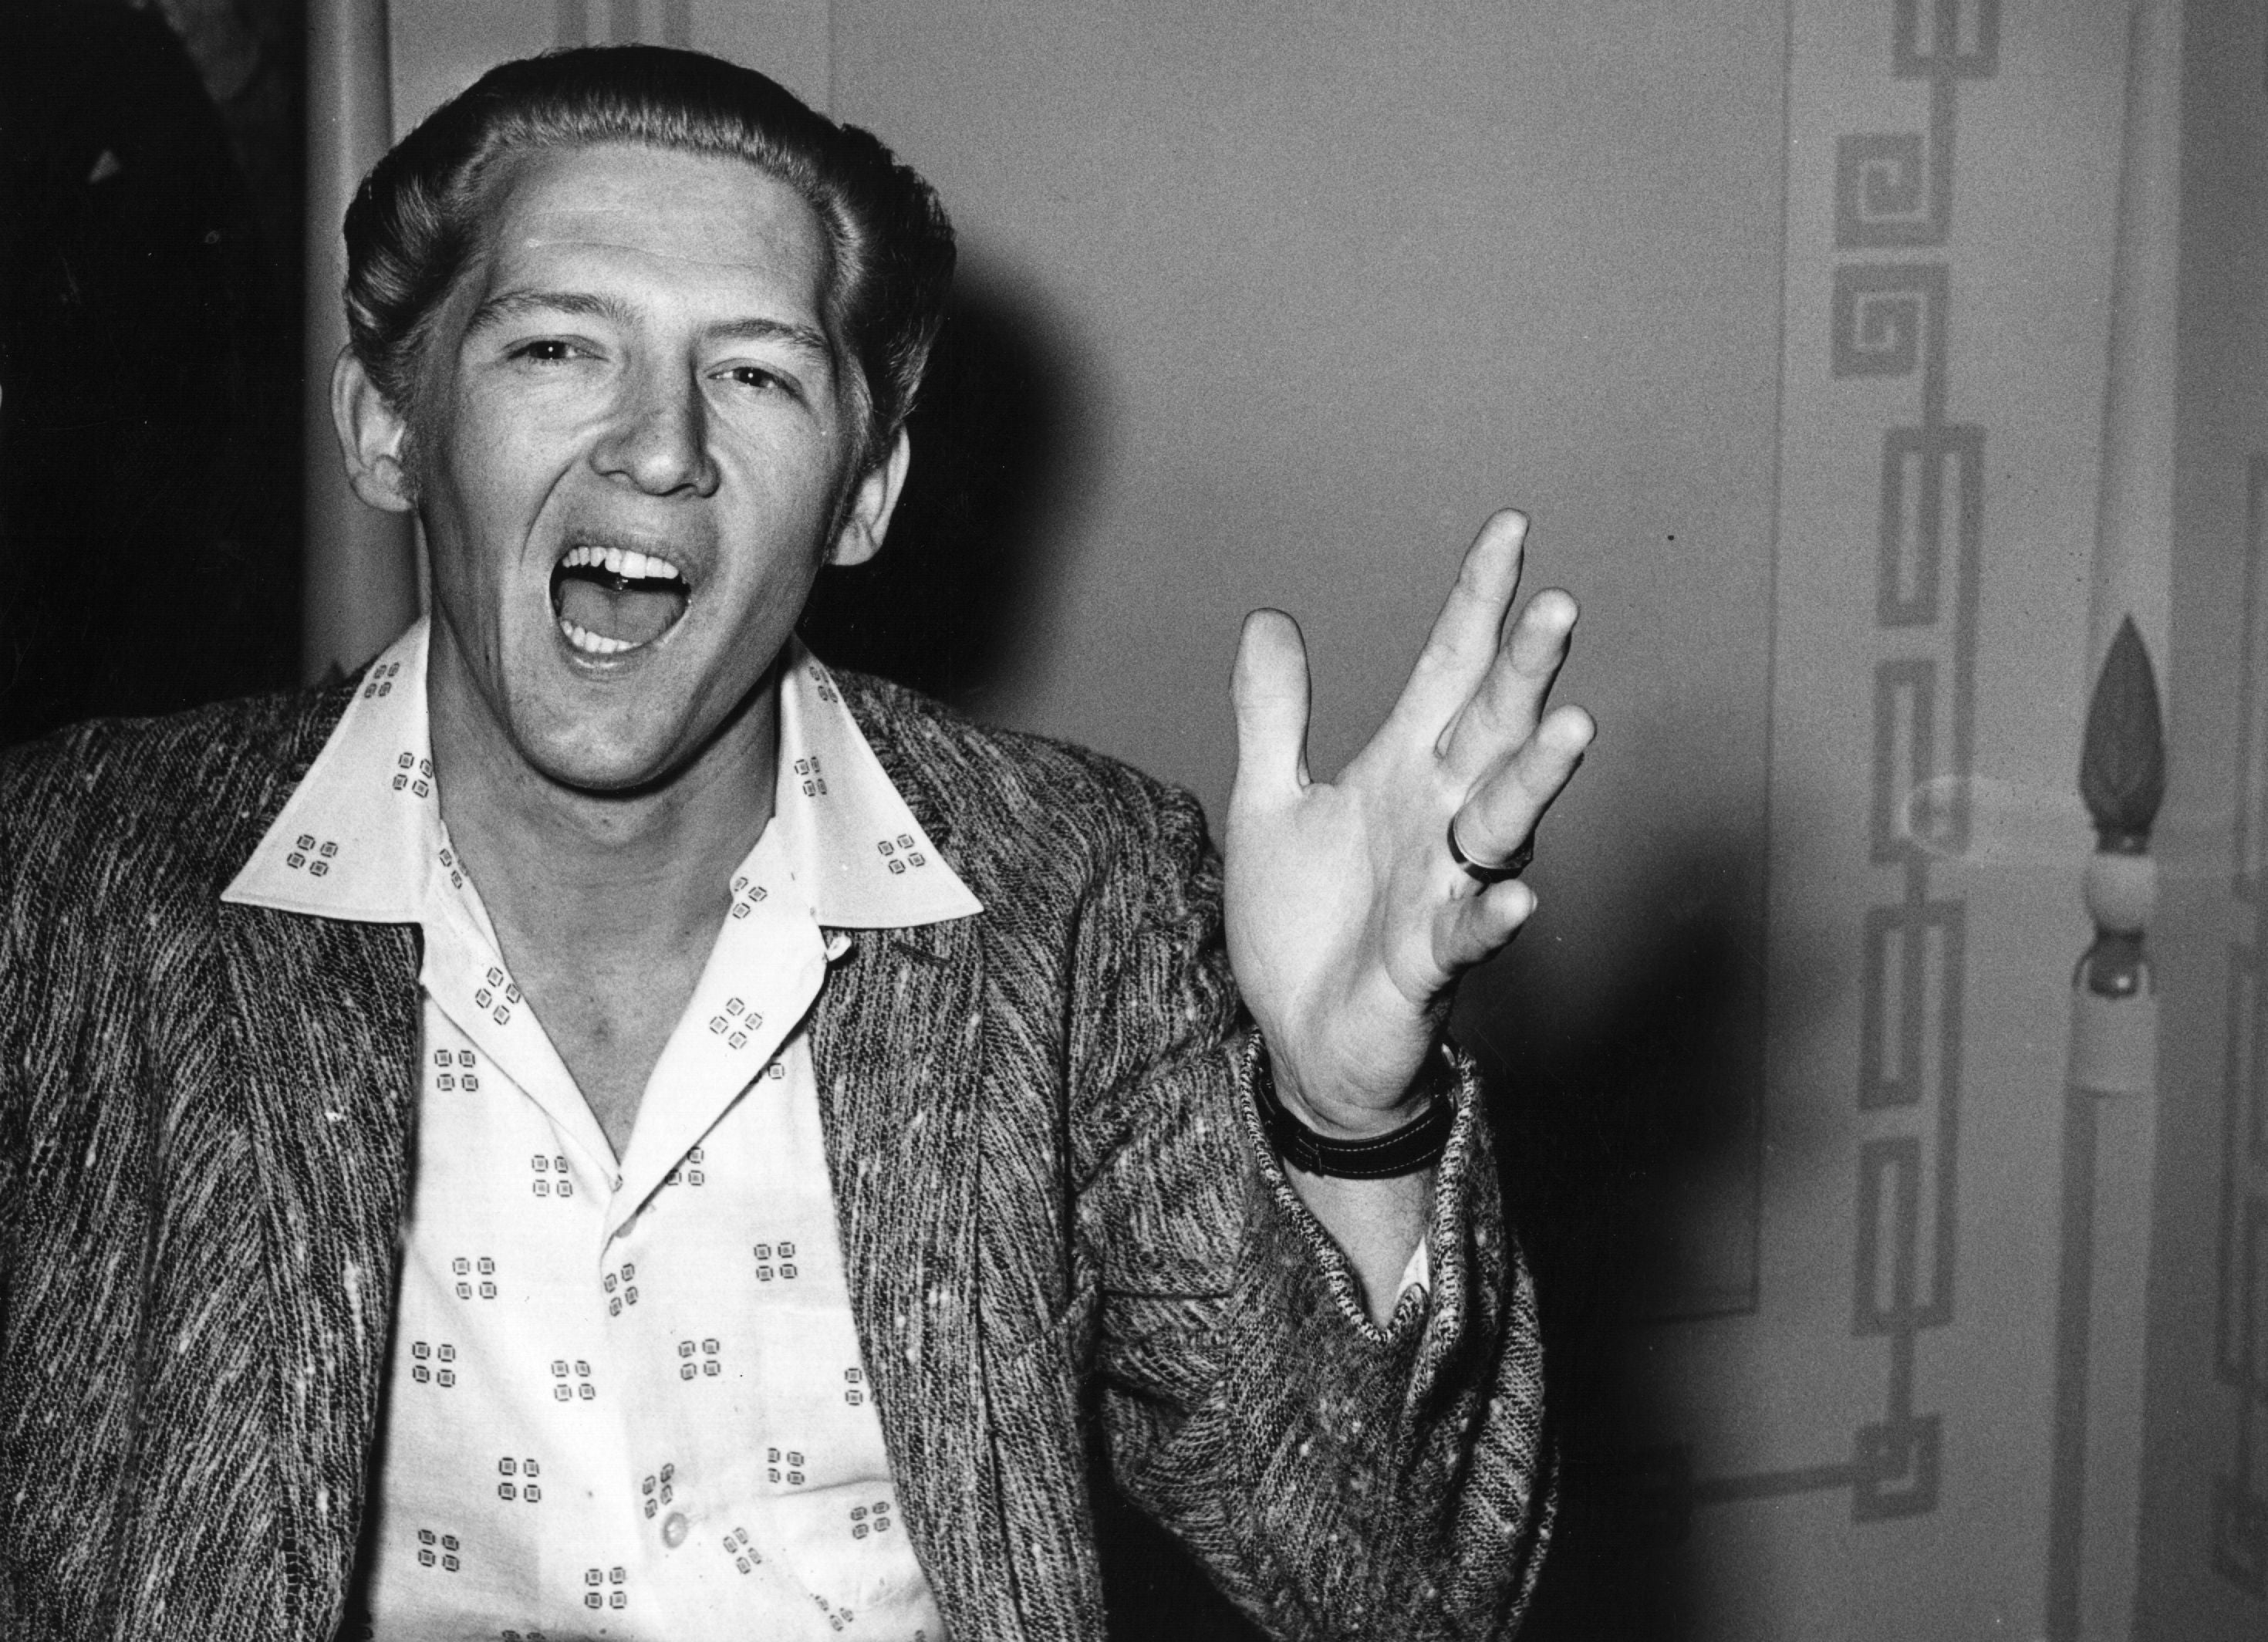 Killer instinct: Jerry Lee Lewis recorded the song the day after it was written